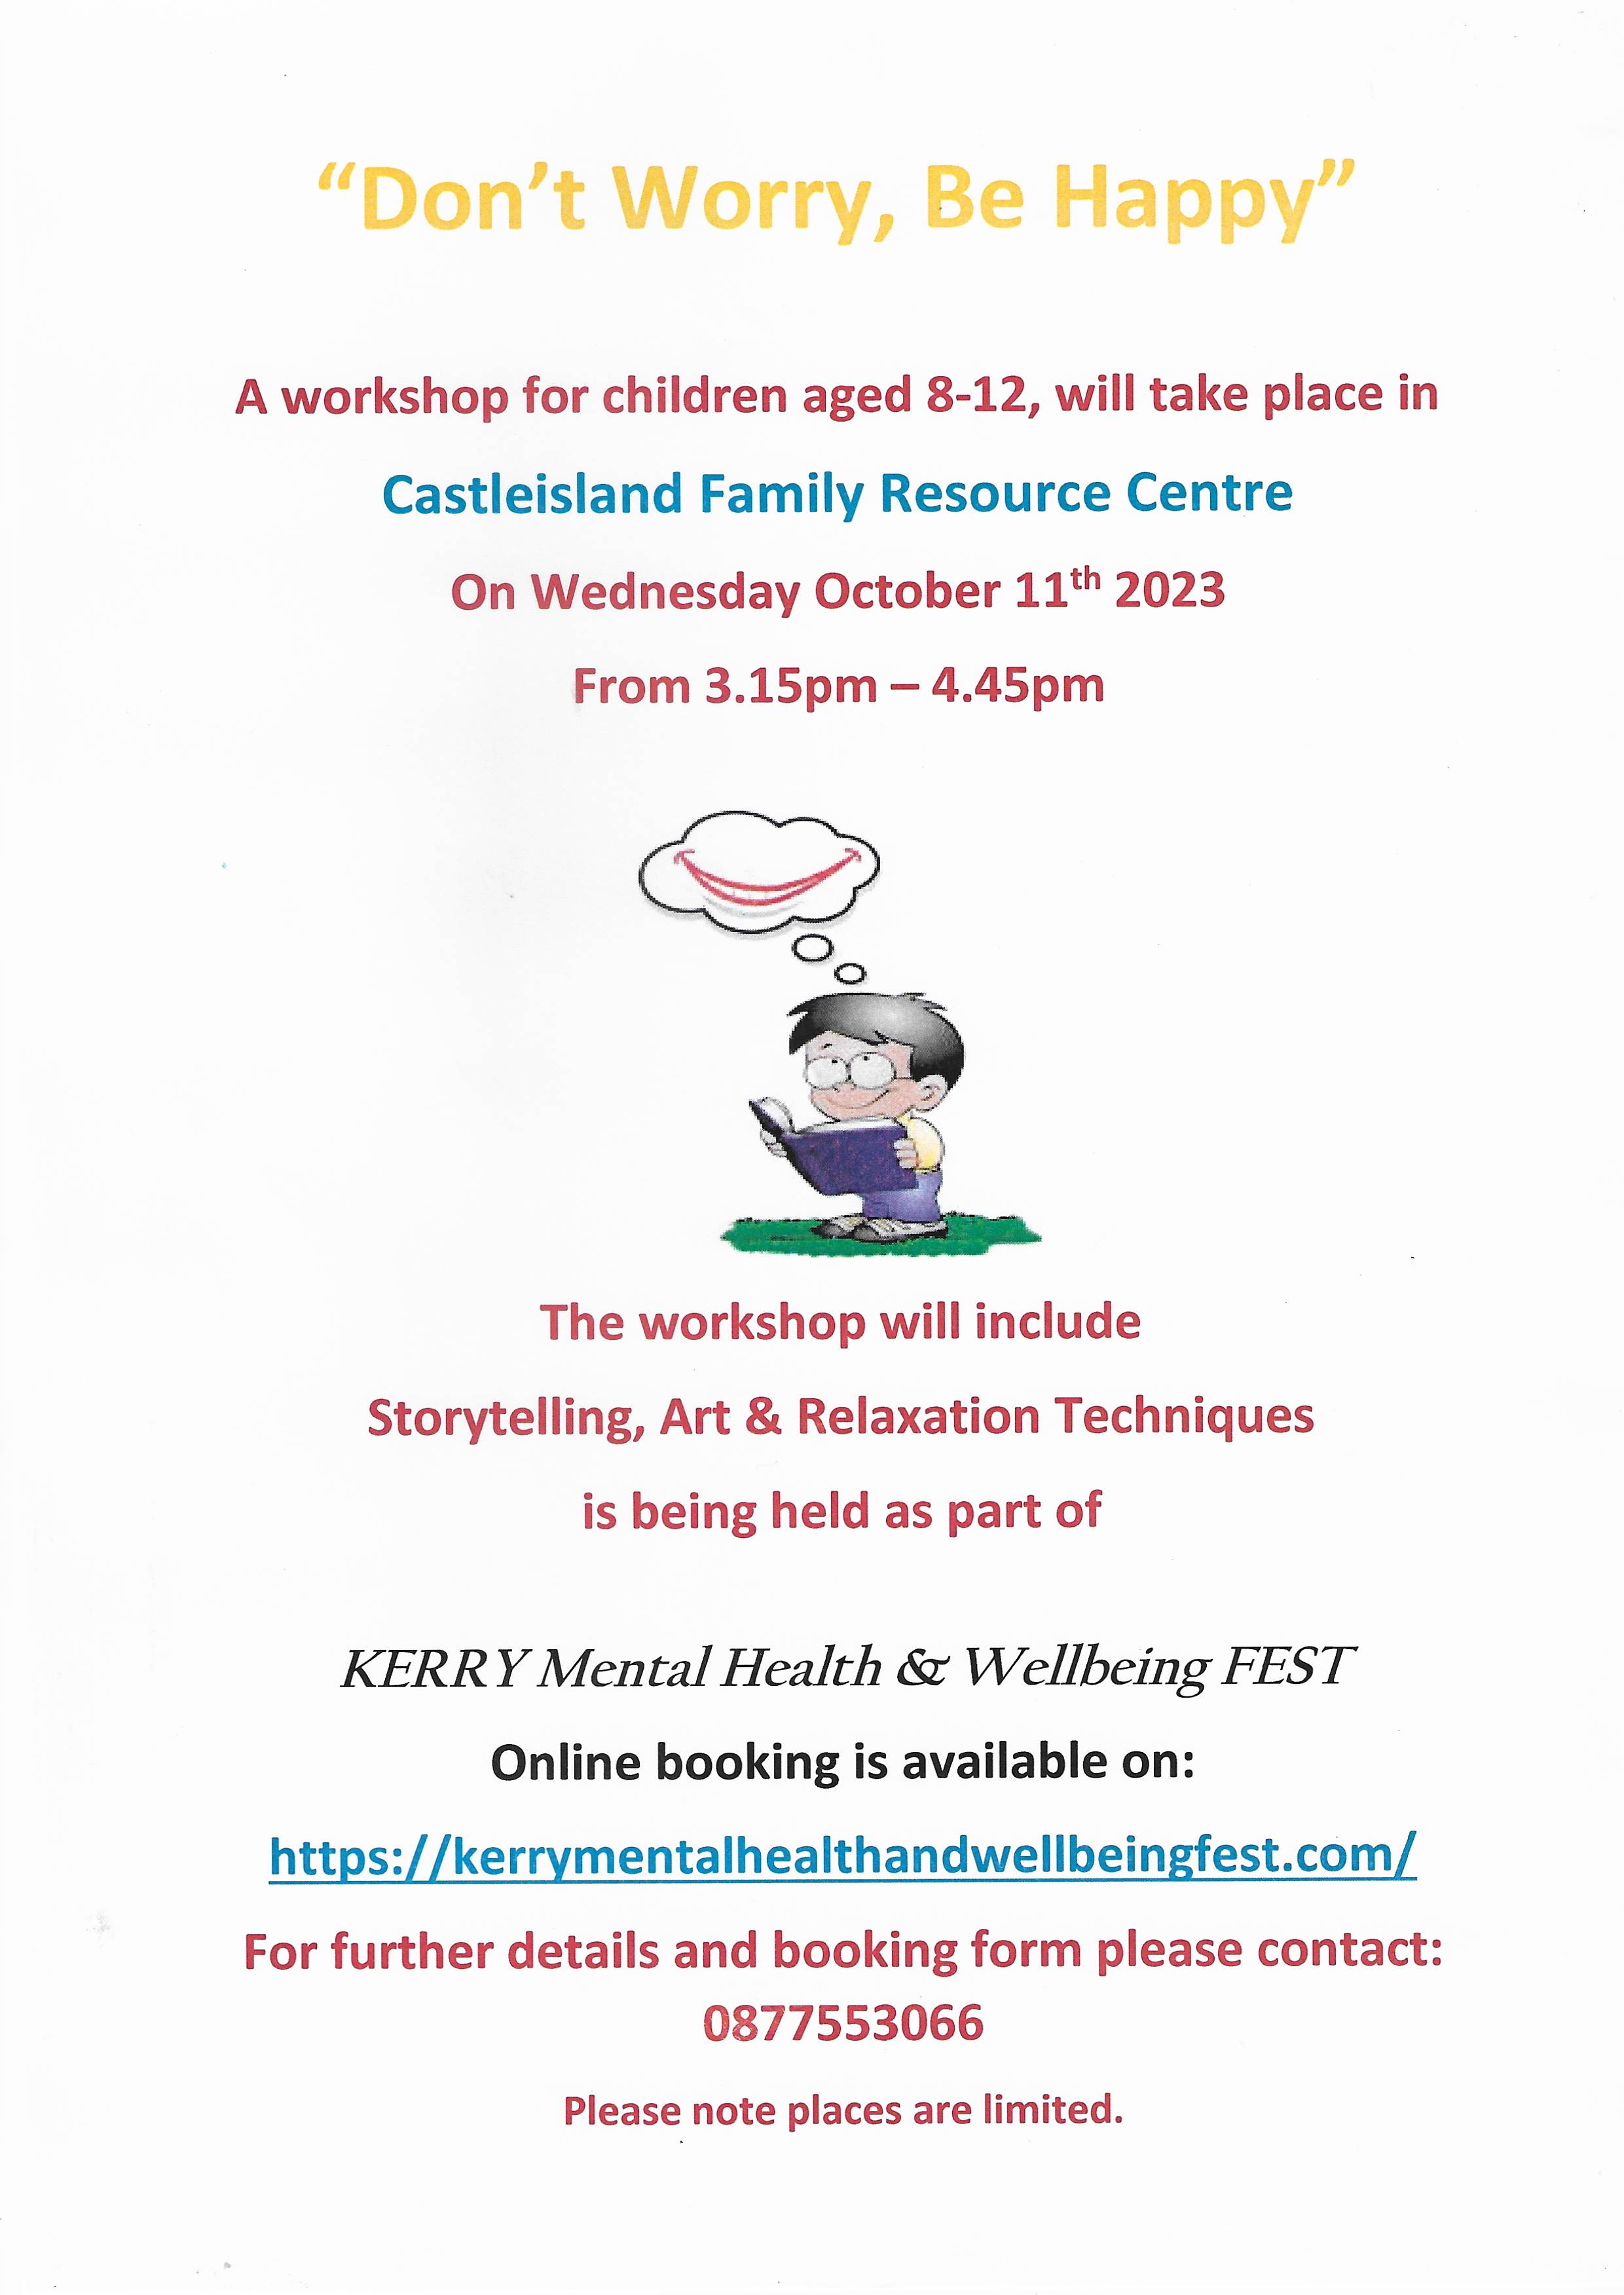 Don't Worry, Be Happy event at Kerry Mental Health & Wellbeing Fest 2022